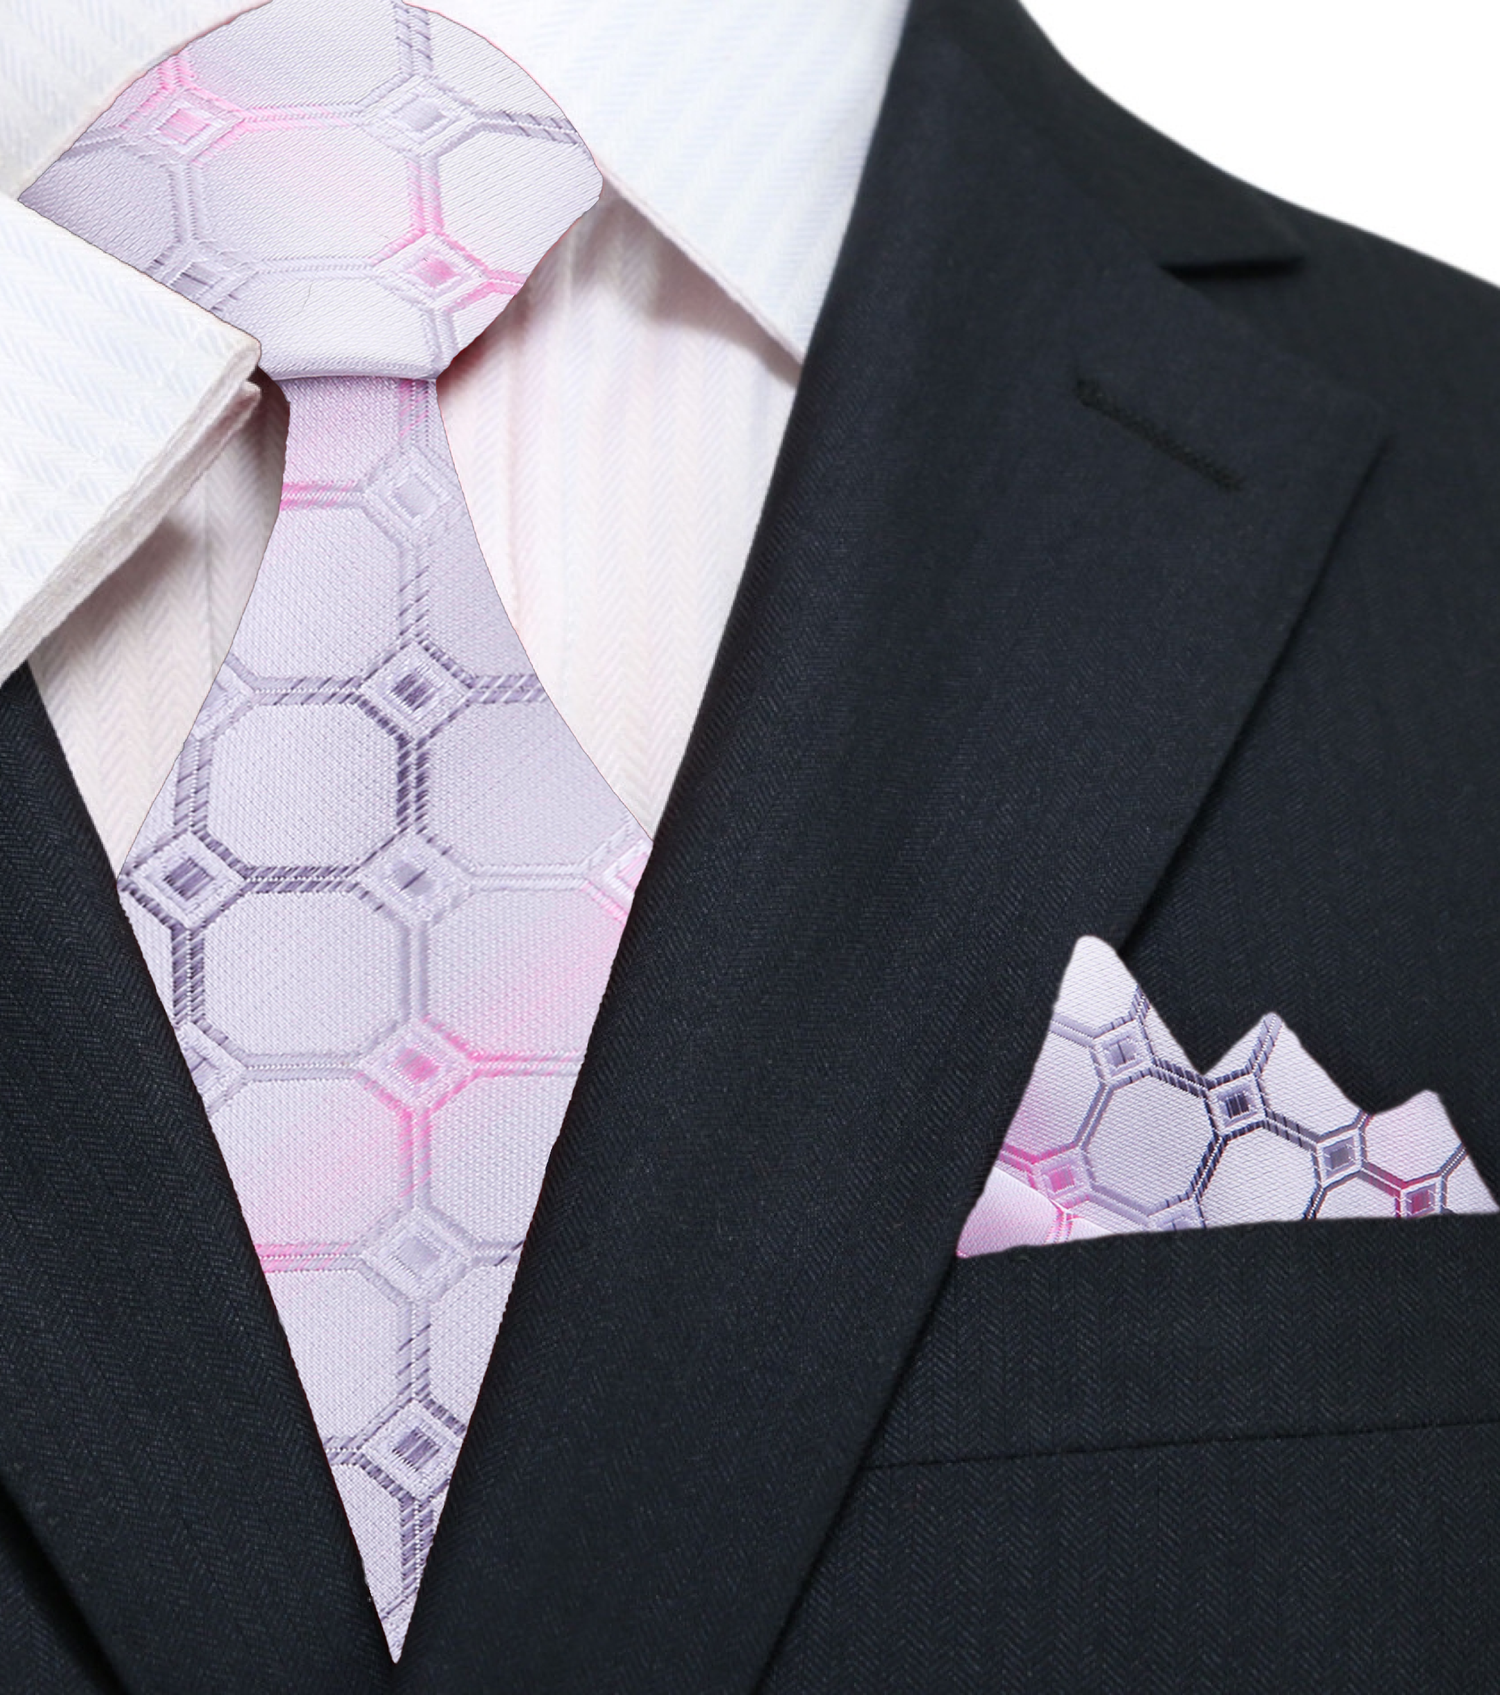 An Icy Silver, White, Pink Geometric Squares With Small Diamonds Pattern Silk Necktie, Matching Pocket Square